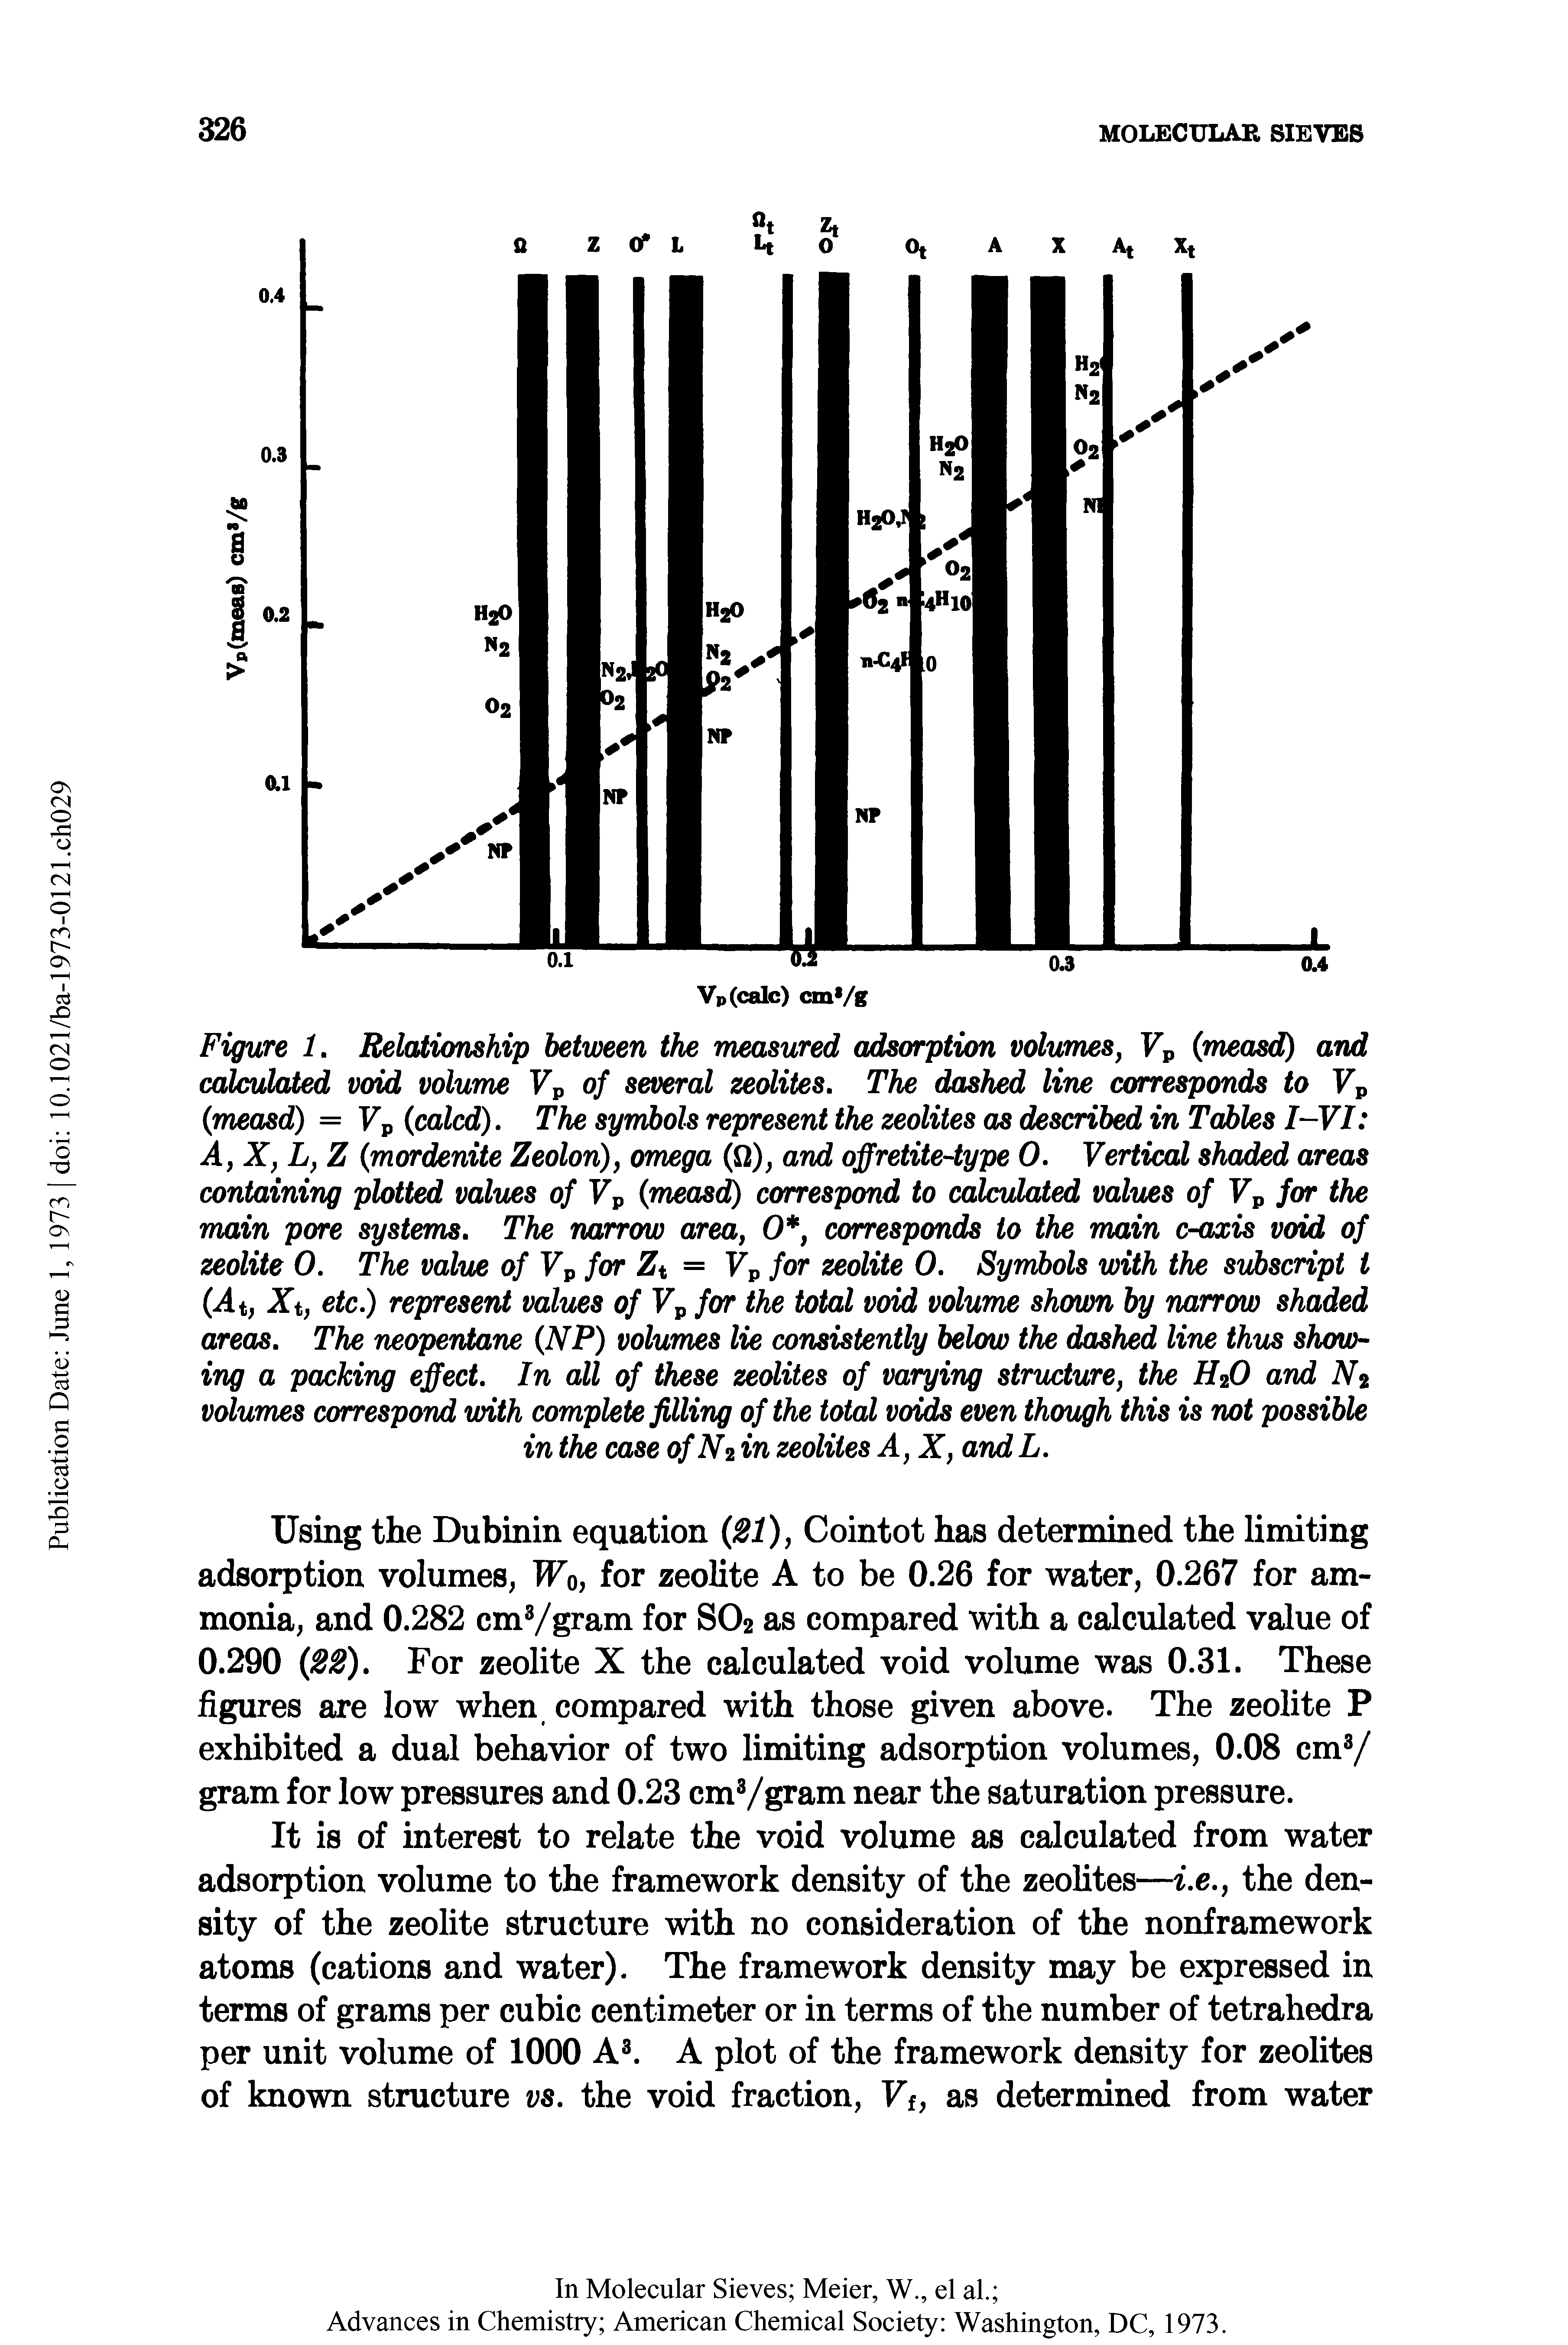 Figure 1. Relationship between the measured adsorption volumes, Fp (measd) and calculated void volume Vp of several zeolites. The dashed line corresponds to Vp (measd) = Vp (calcd). The symbols represent the zeolites as described in Tables I-VI A, X, L, Z (mordenite Zeolon), omega (to), and offretite-type 0. Vertical shaded areas containing plotted values of Vp (measd) correspond to calculated values of Vp for the main pore systems. The narrow area, 0, corresponds to the main c-axis void of zeolite 0. The value of Vp for Zt = Vp for zeolite 0. Symbols with the subscript t (At Xt) etc.) represent values of Vp for the total void volume shown by narrow shaded areas. The neopentane (NP) volumes lie consistently below the dashed line thus showing a paeking effect. In all of these zeolites of varying structure, the H20 and N2 volumes correspond with complete filling of the total voids even though this is not possible in the case of N2 in zeolites A, X, and L.